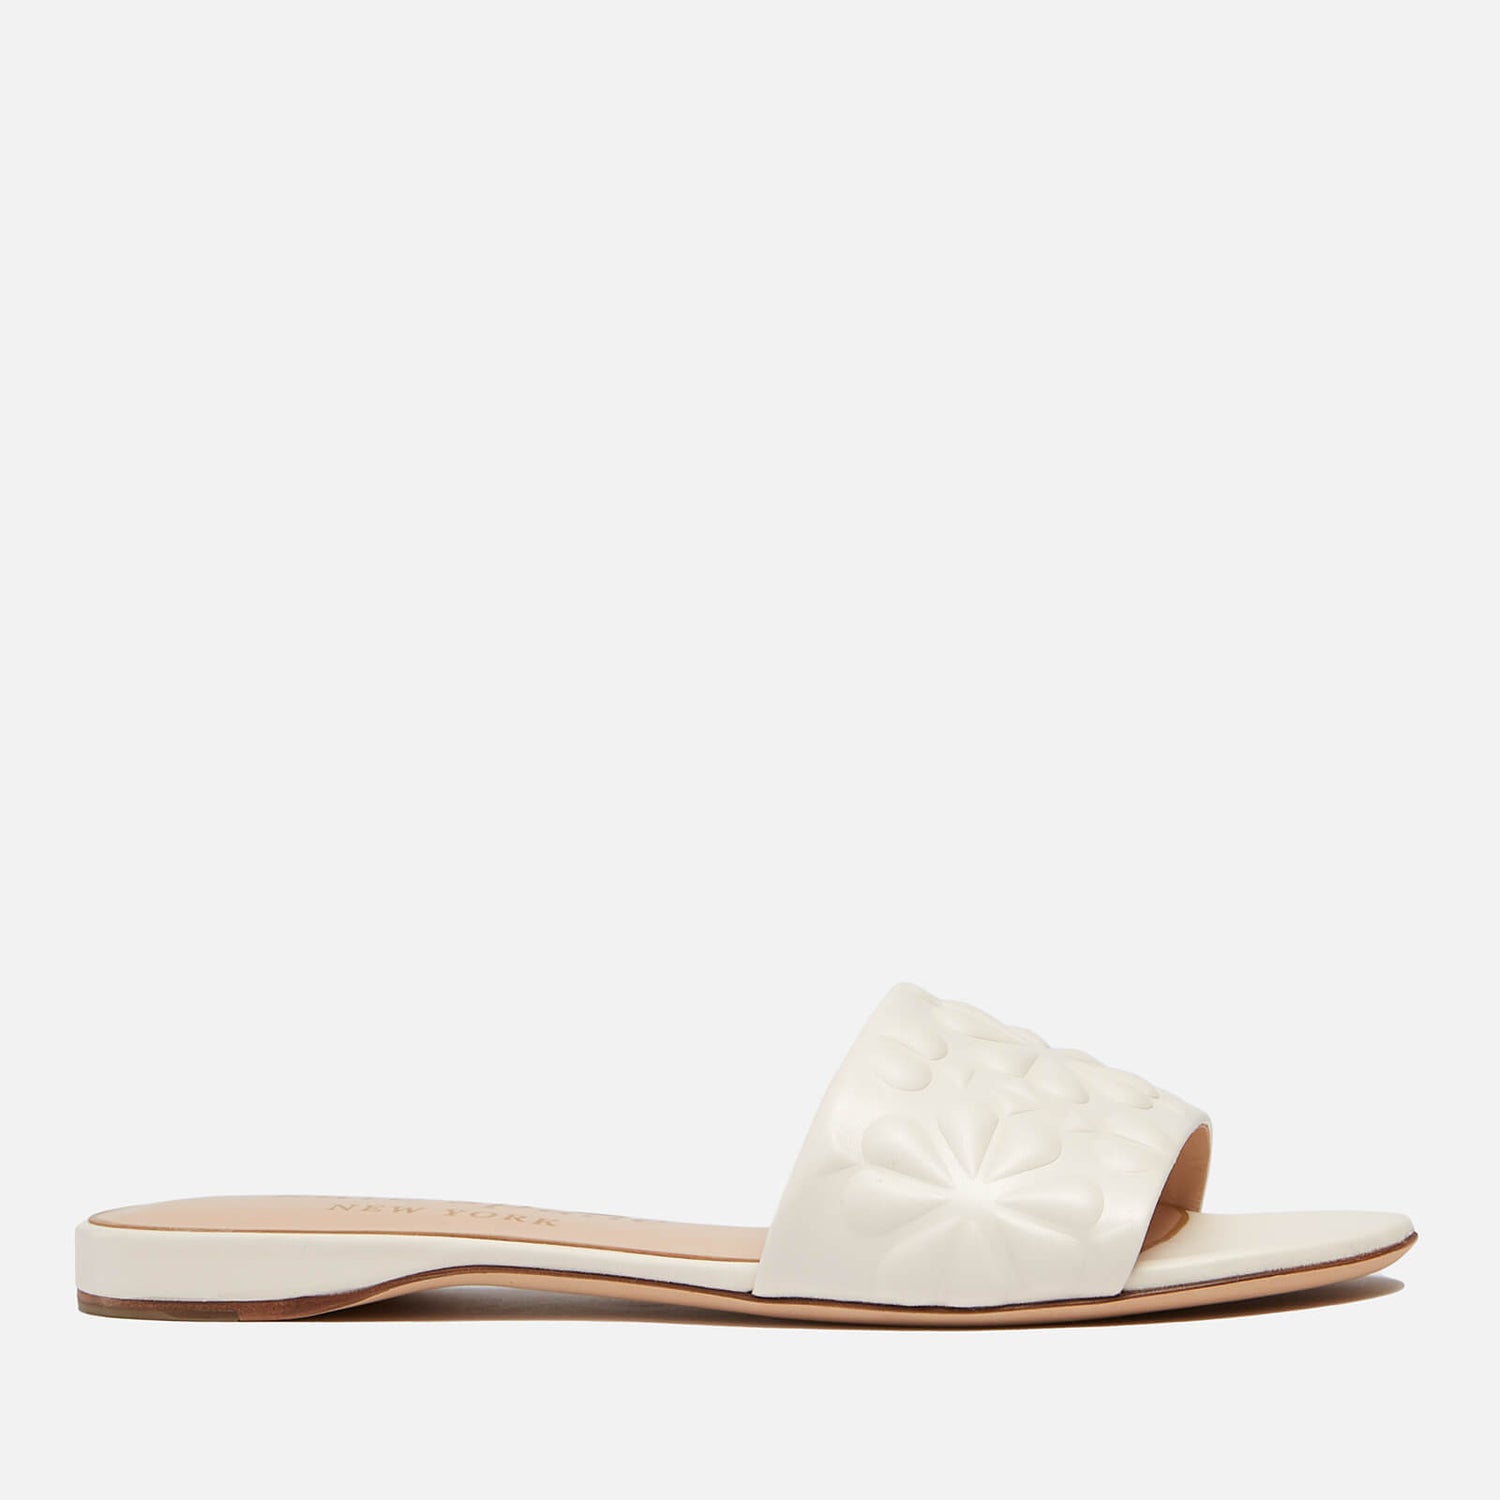 Kate Spade New York Women's Emmie Leather Slide Sandals - Parchment - UK 3